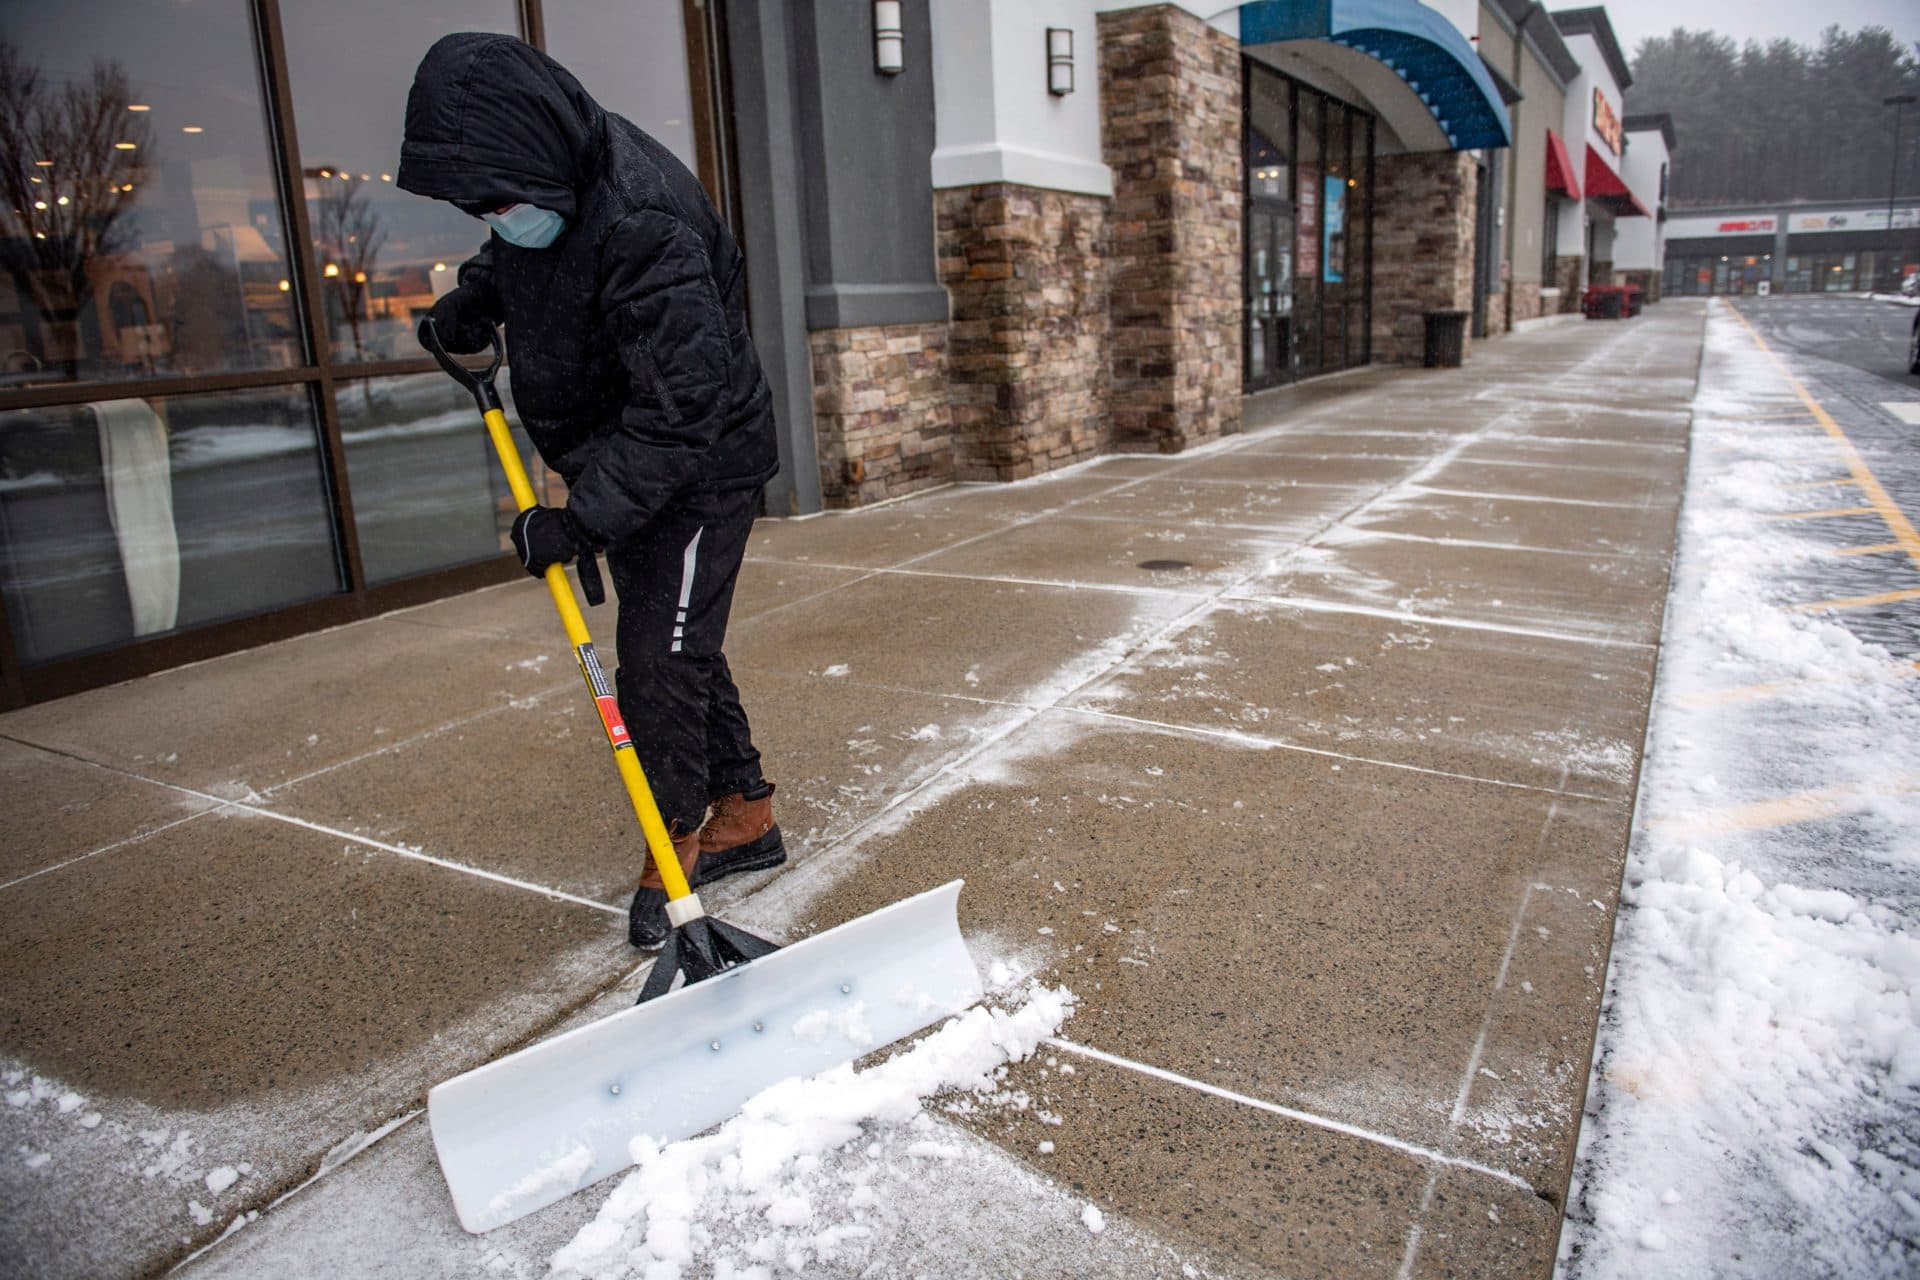 A worker clears snow and sleet from a shopping plaza sidewalk during a winter storm in Saugus. (Joseph Prezioso / AFP via Getty Images)